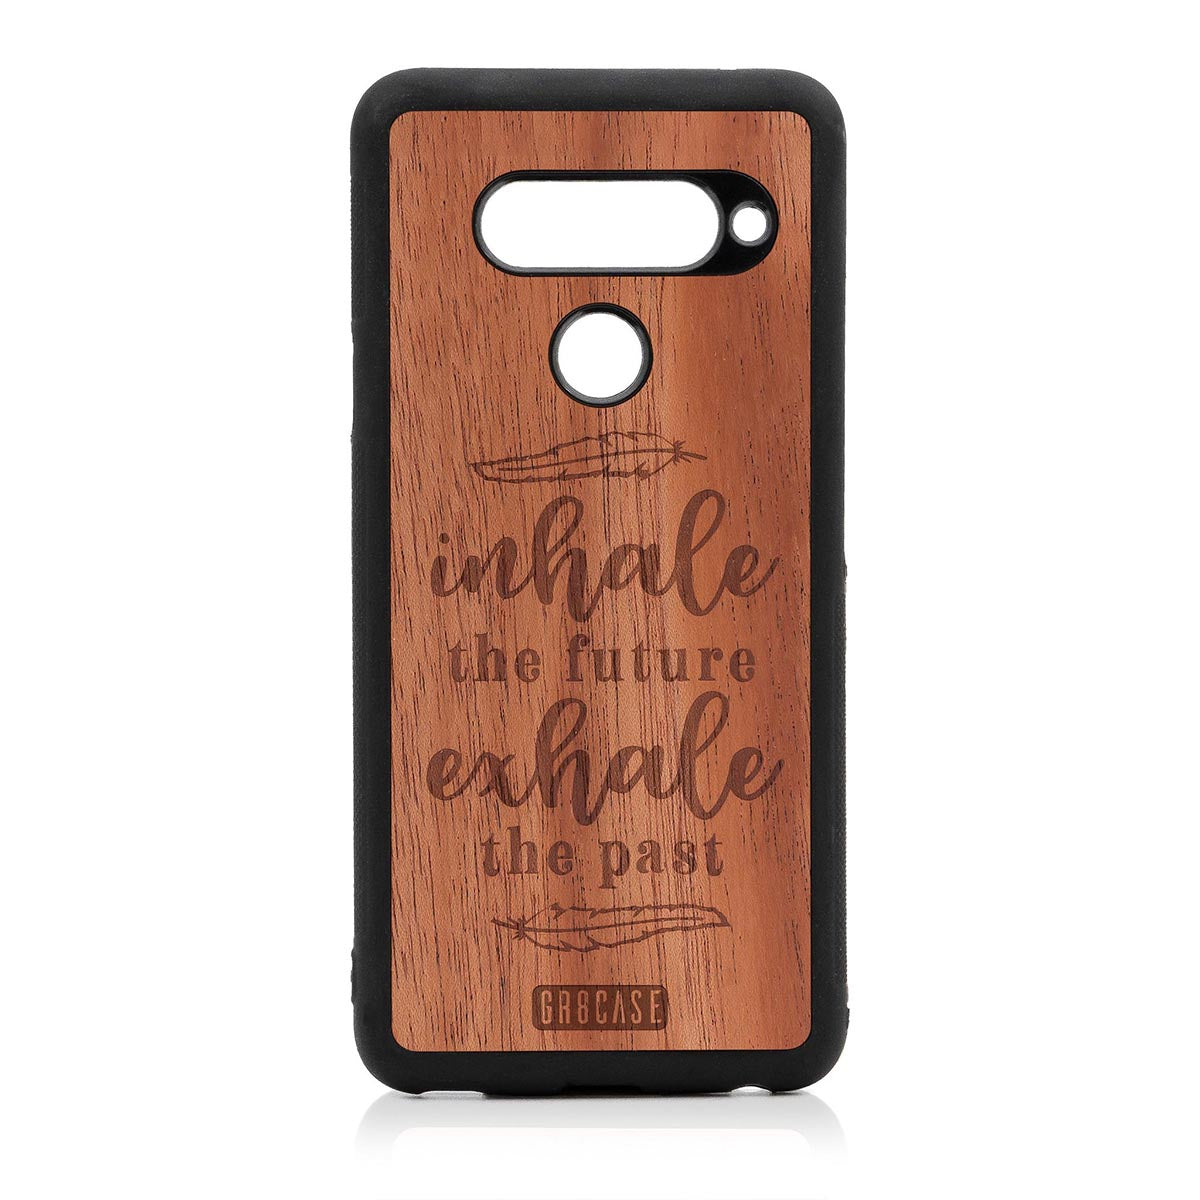 Inhale The Future Exhale The Past Design Wood Case LG V40 by GR8CASE